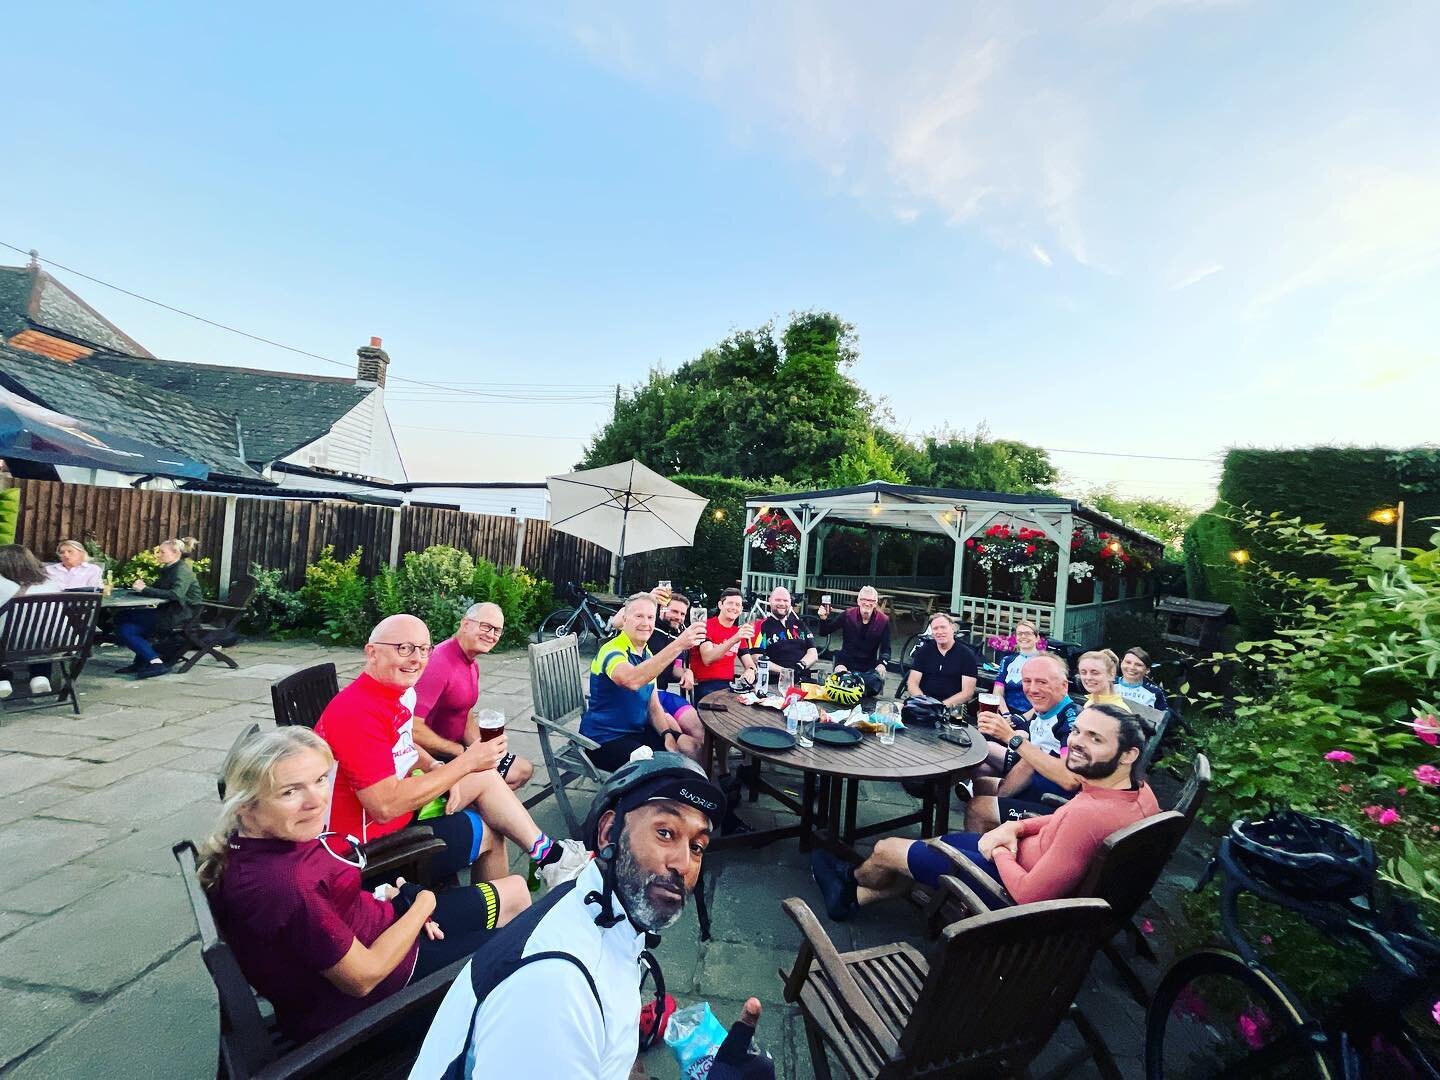 Arguably what we do best, besides cycling, finding a nice pub garden to enjoy a cold one on a summers evening.. Not forgetting the mini cheddars 🙌🏻